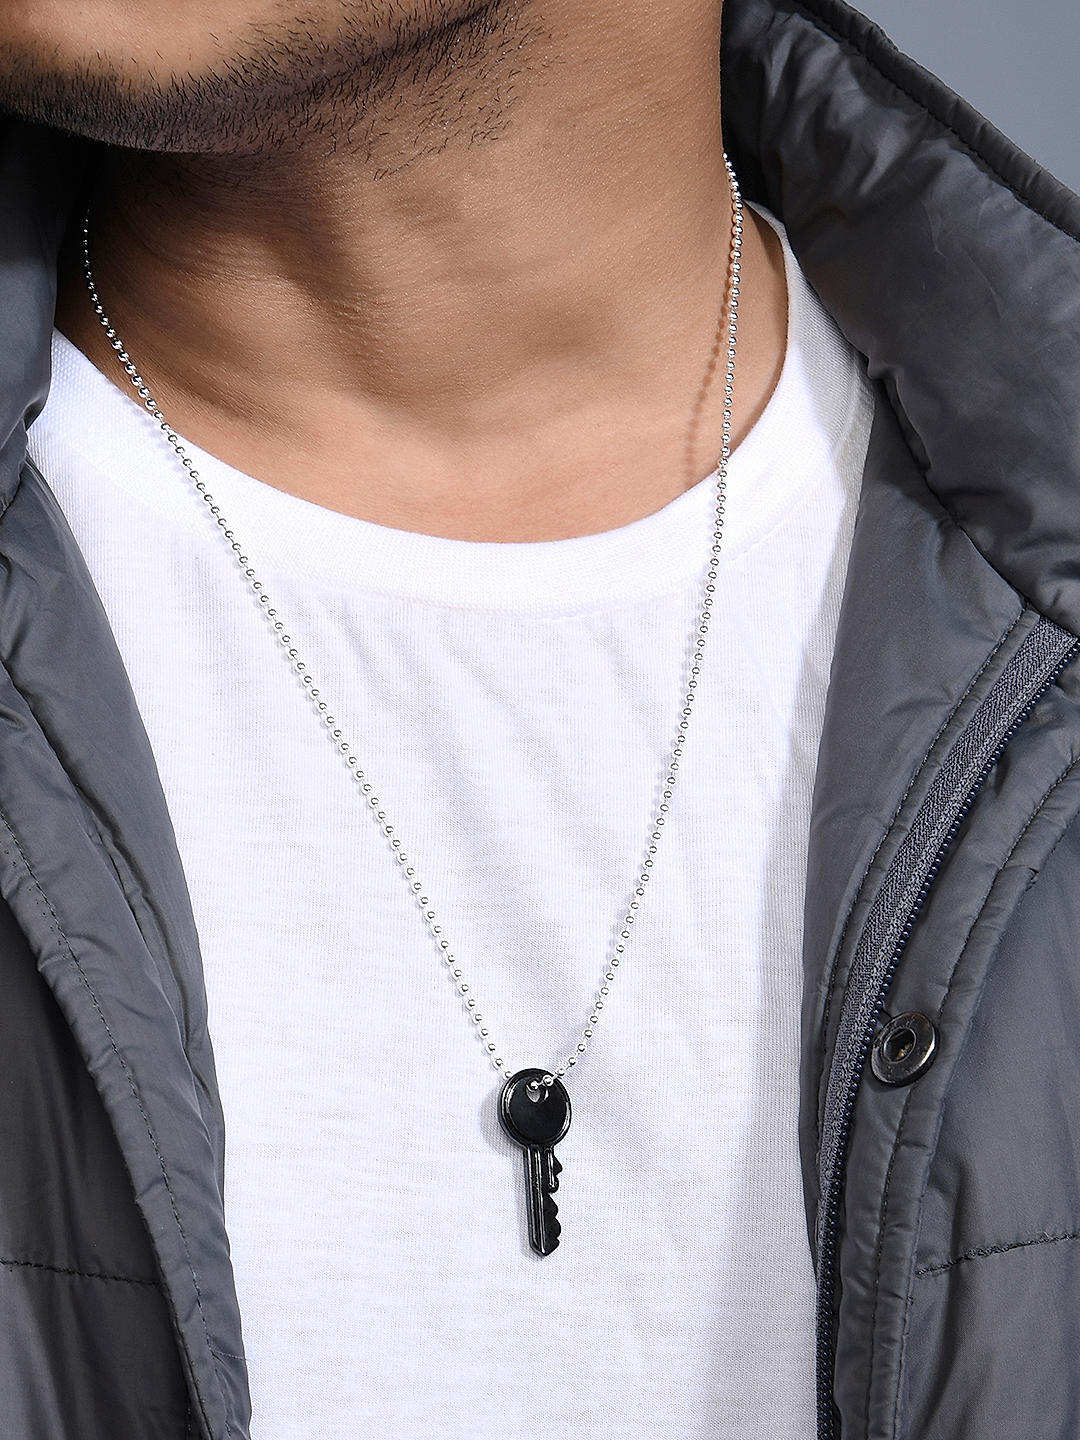 Amazon.com: Mens Leather Fabric Necklace Black Silicone Necklace For Men  Set With a Stainless Steel Bead - Choker Necklace For Men - 17.7” Total  Length - Jewelry for Him, Boyfriend, Husband, Christmas